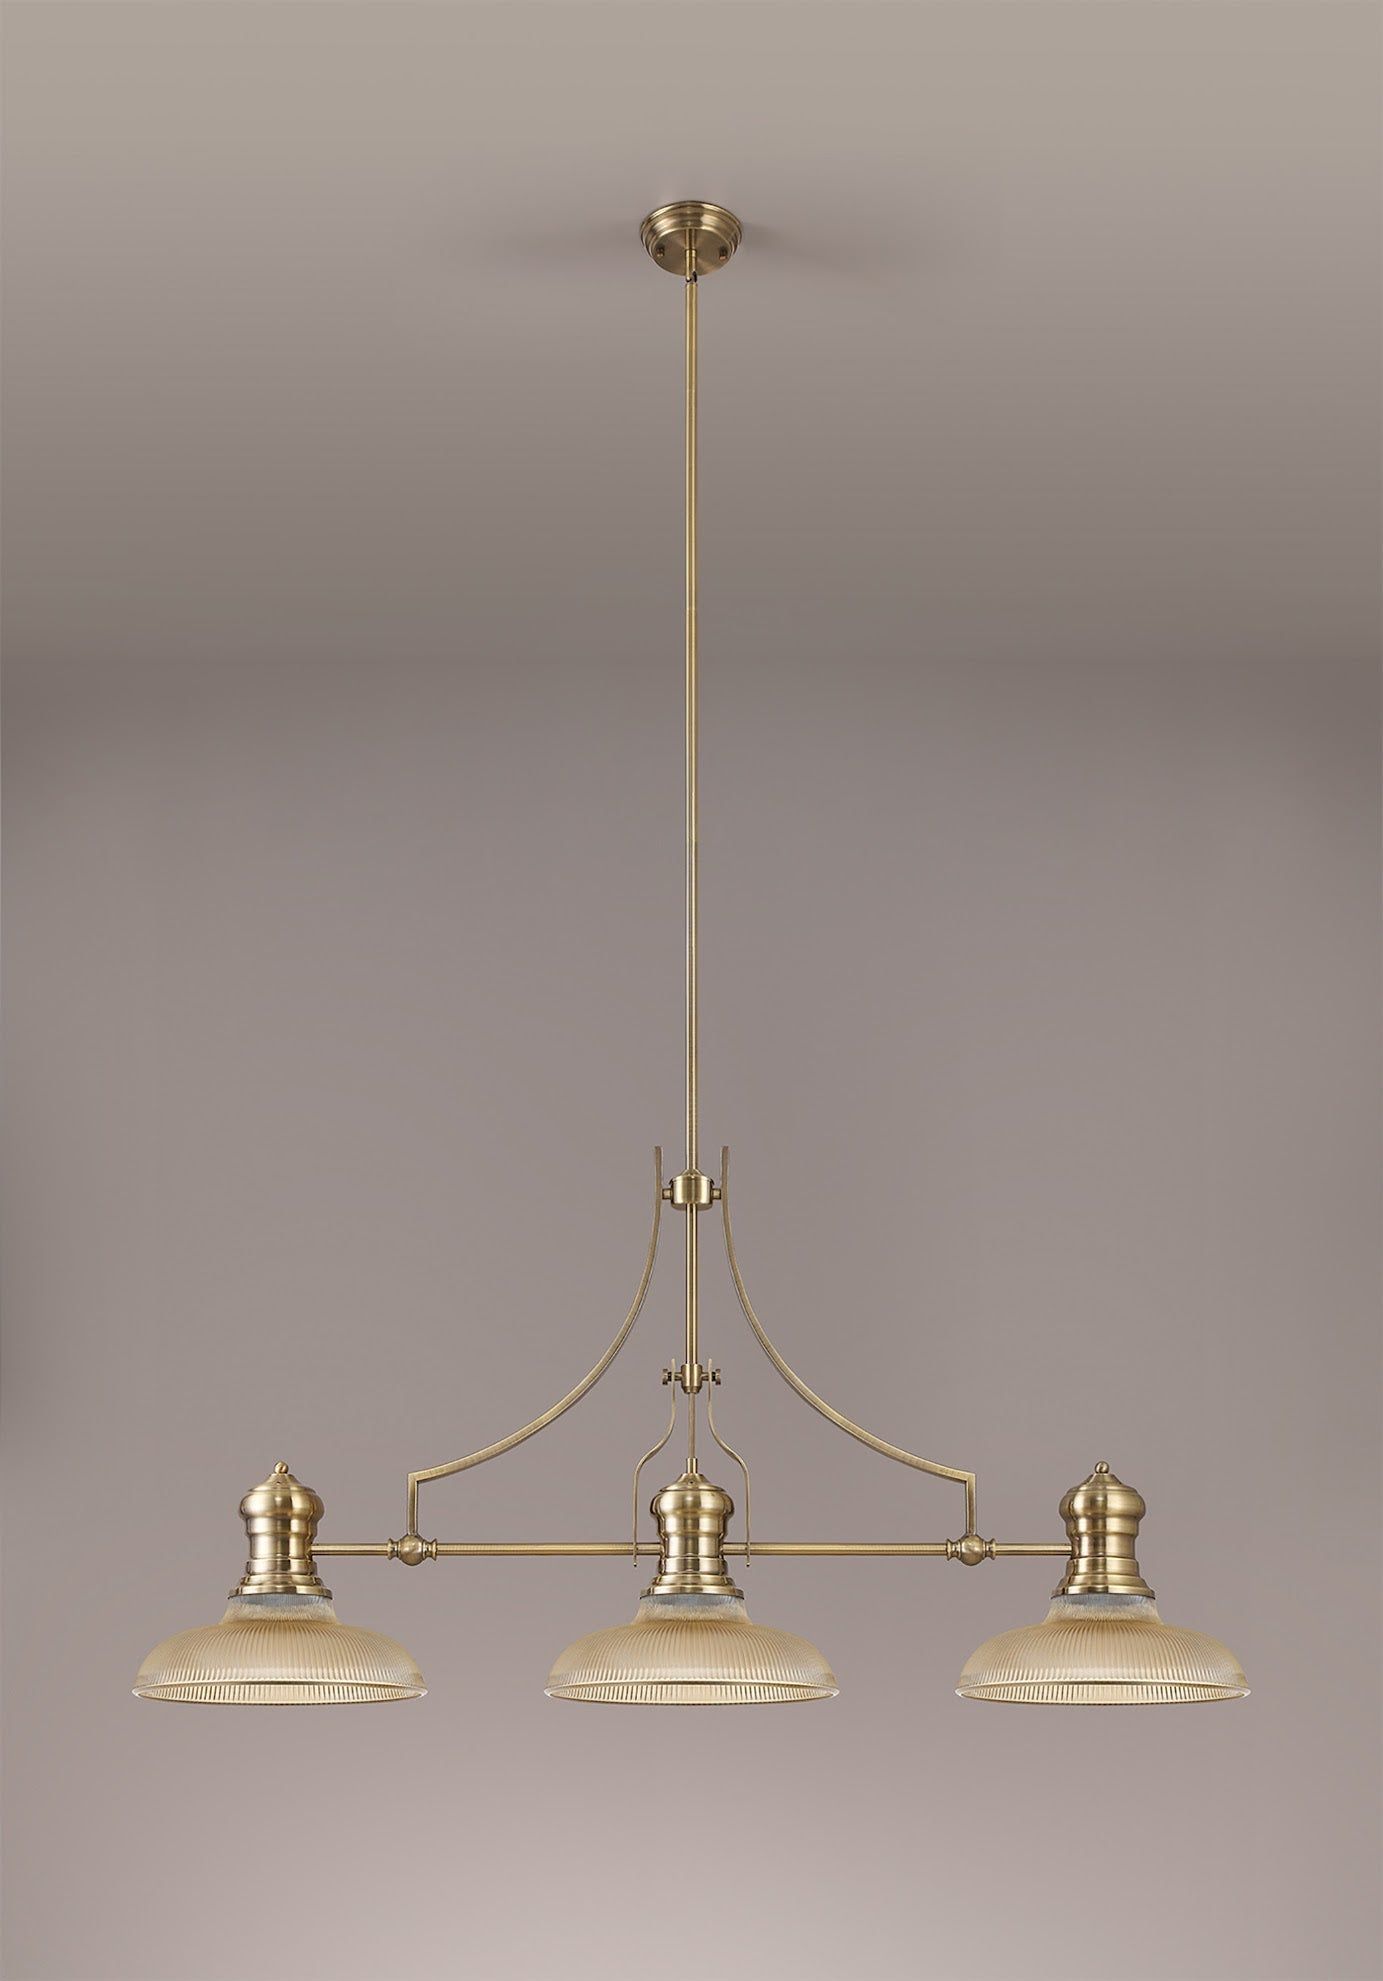 Savannah 3 Light Linear Pendant E27 With 30cm Round Glass Shade, Antique Brass, Amber